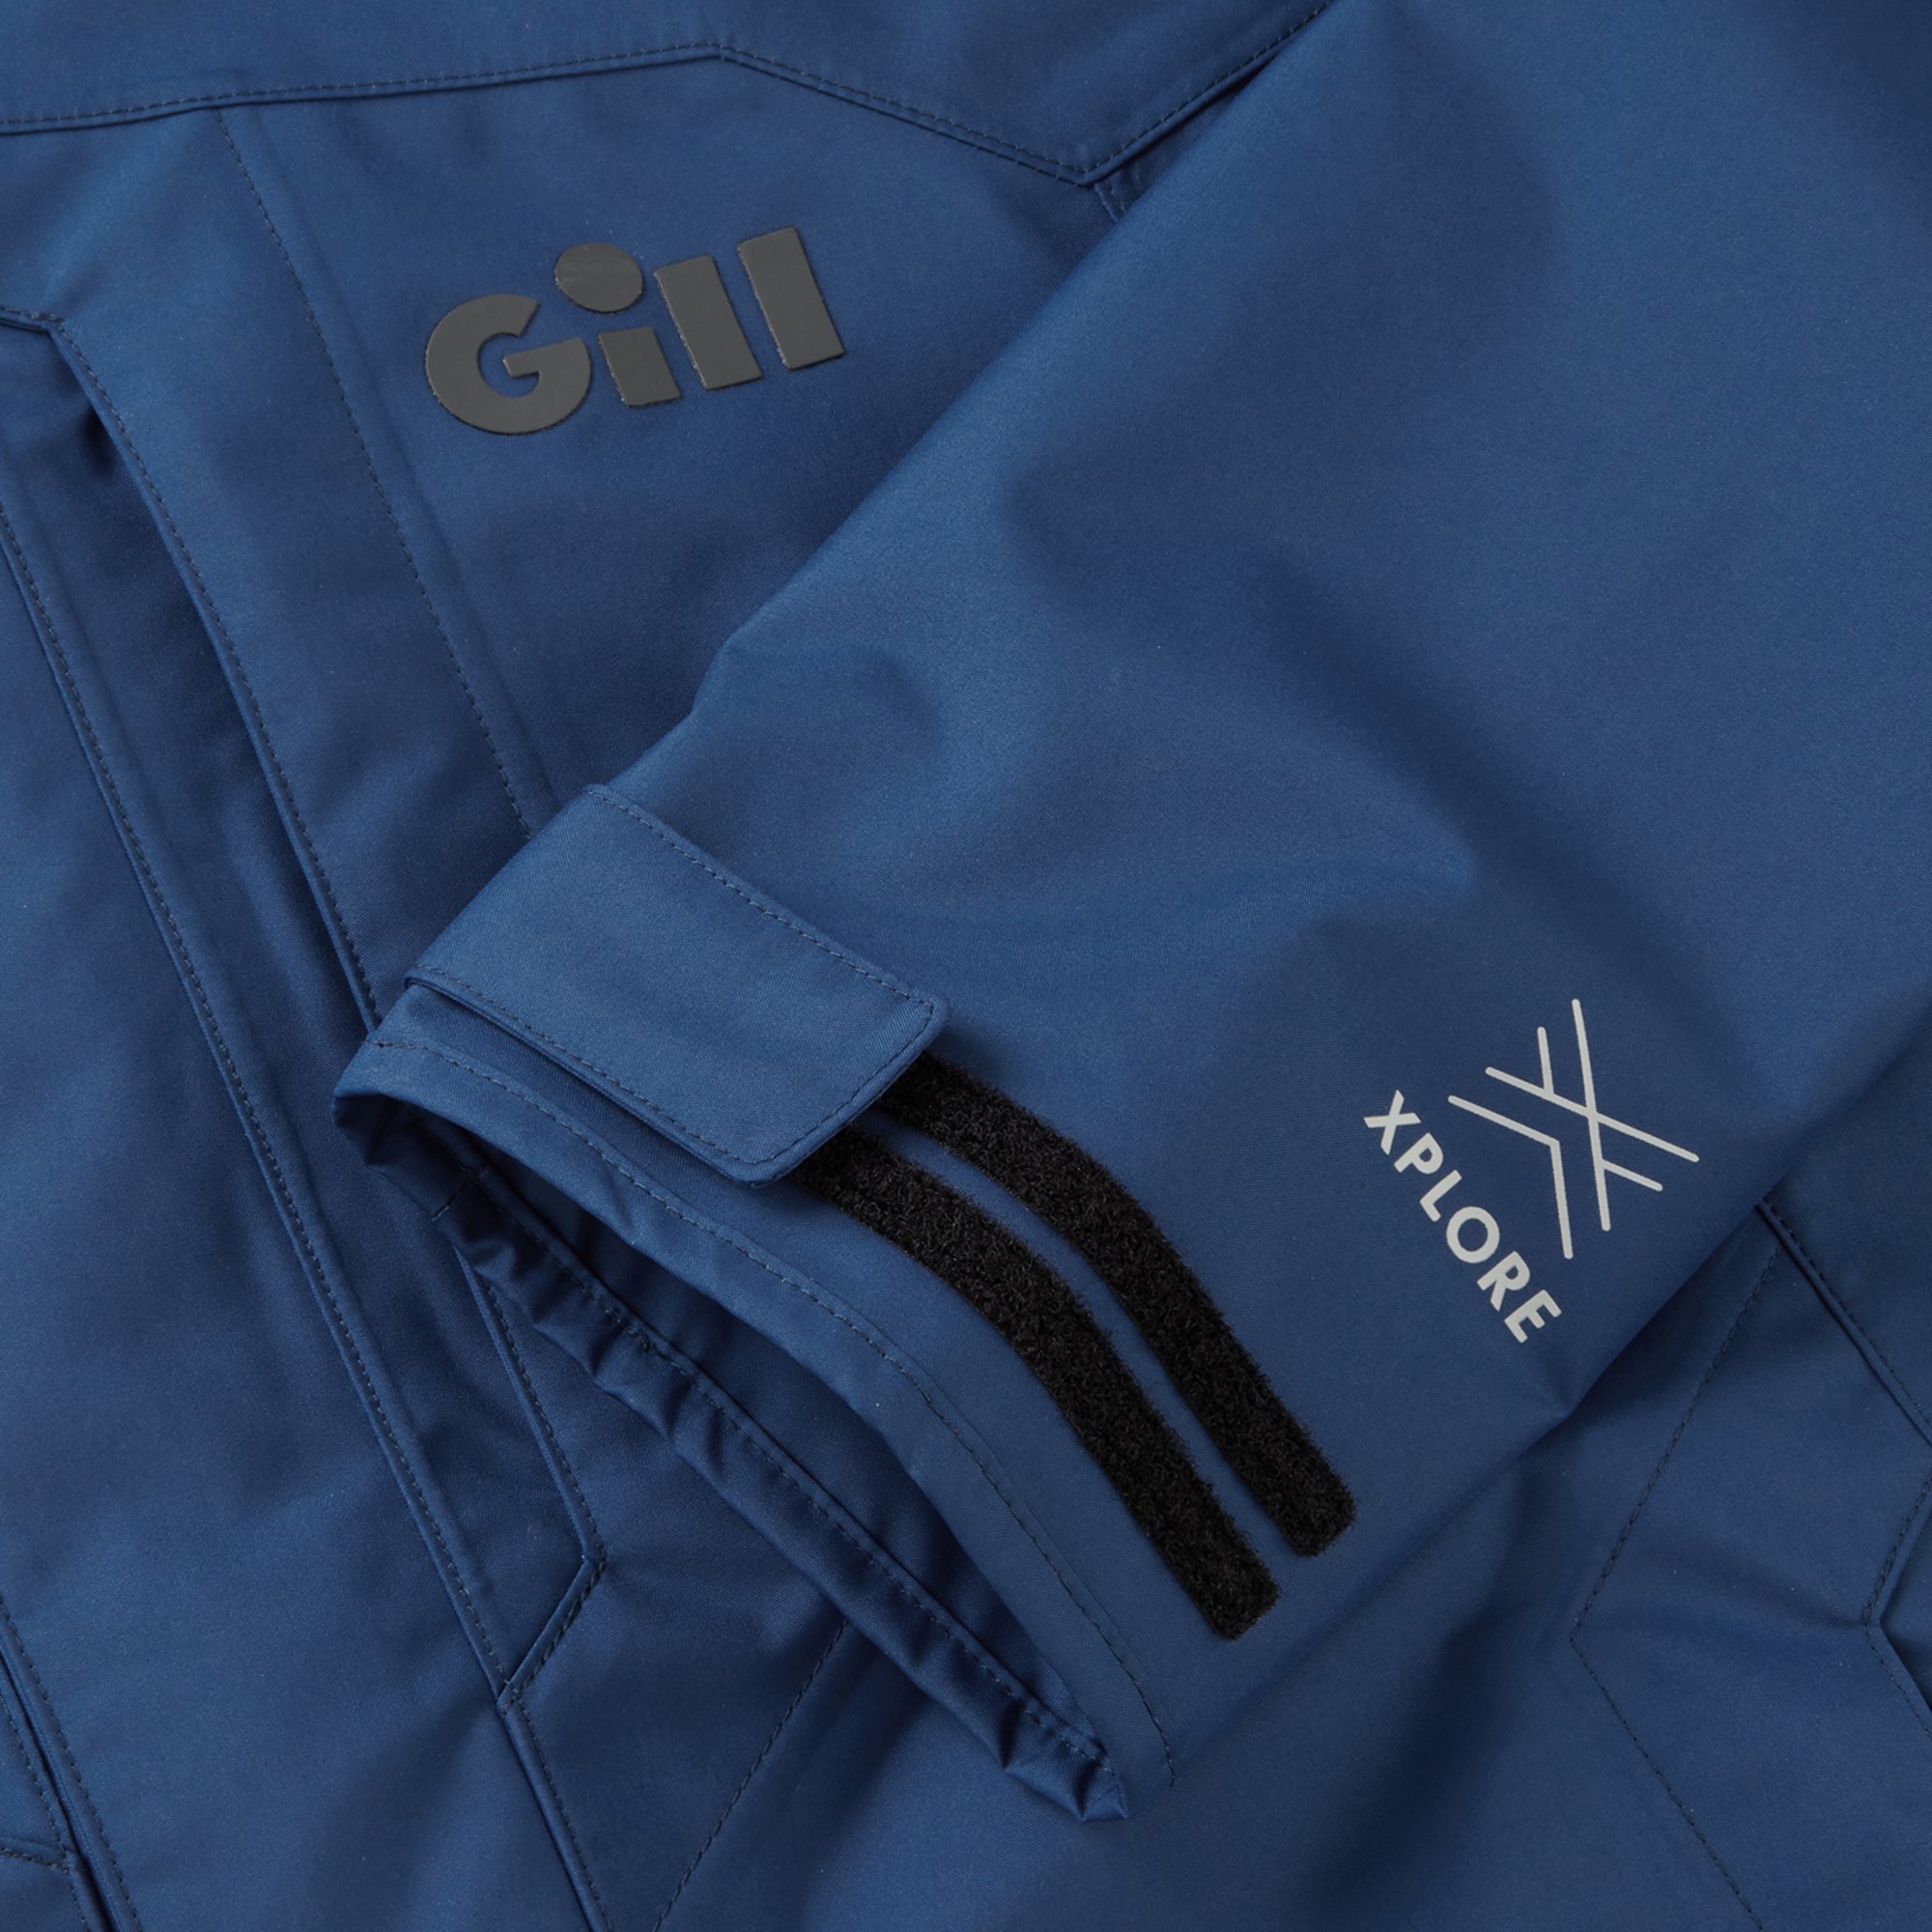 FG301J Aspect Jacket: Gill Fishing Technical - Fishing Official Store US Apparel